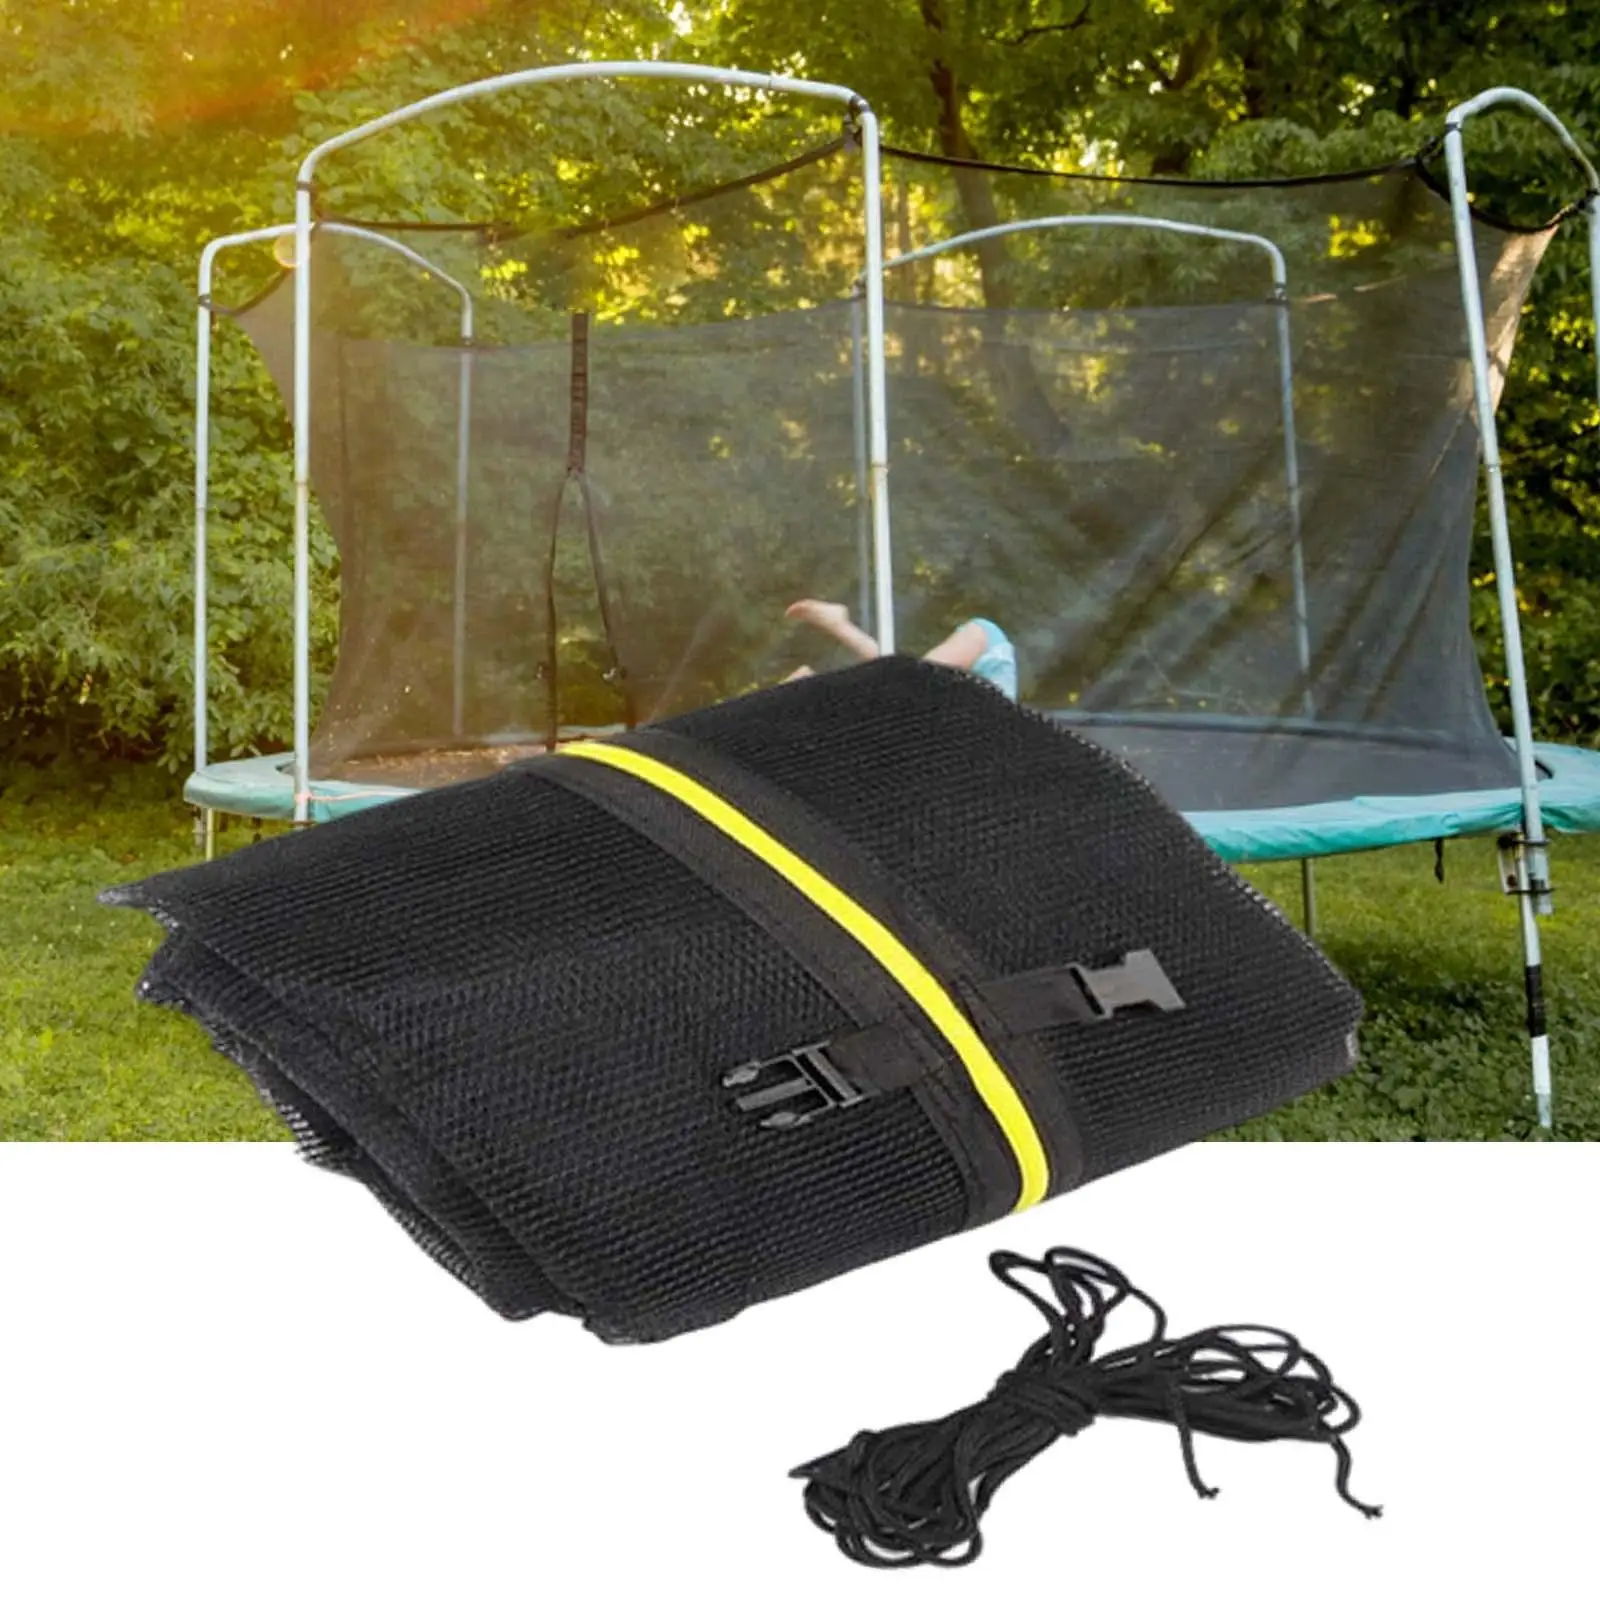 Net Fence Fits 6/8 Poles Round Frame Durable Protection Net Safety Net for Outside